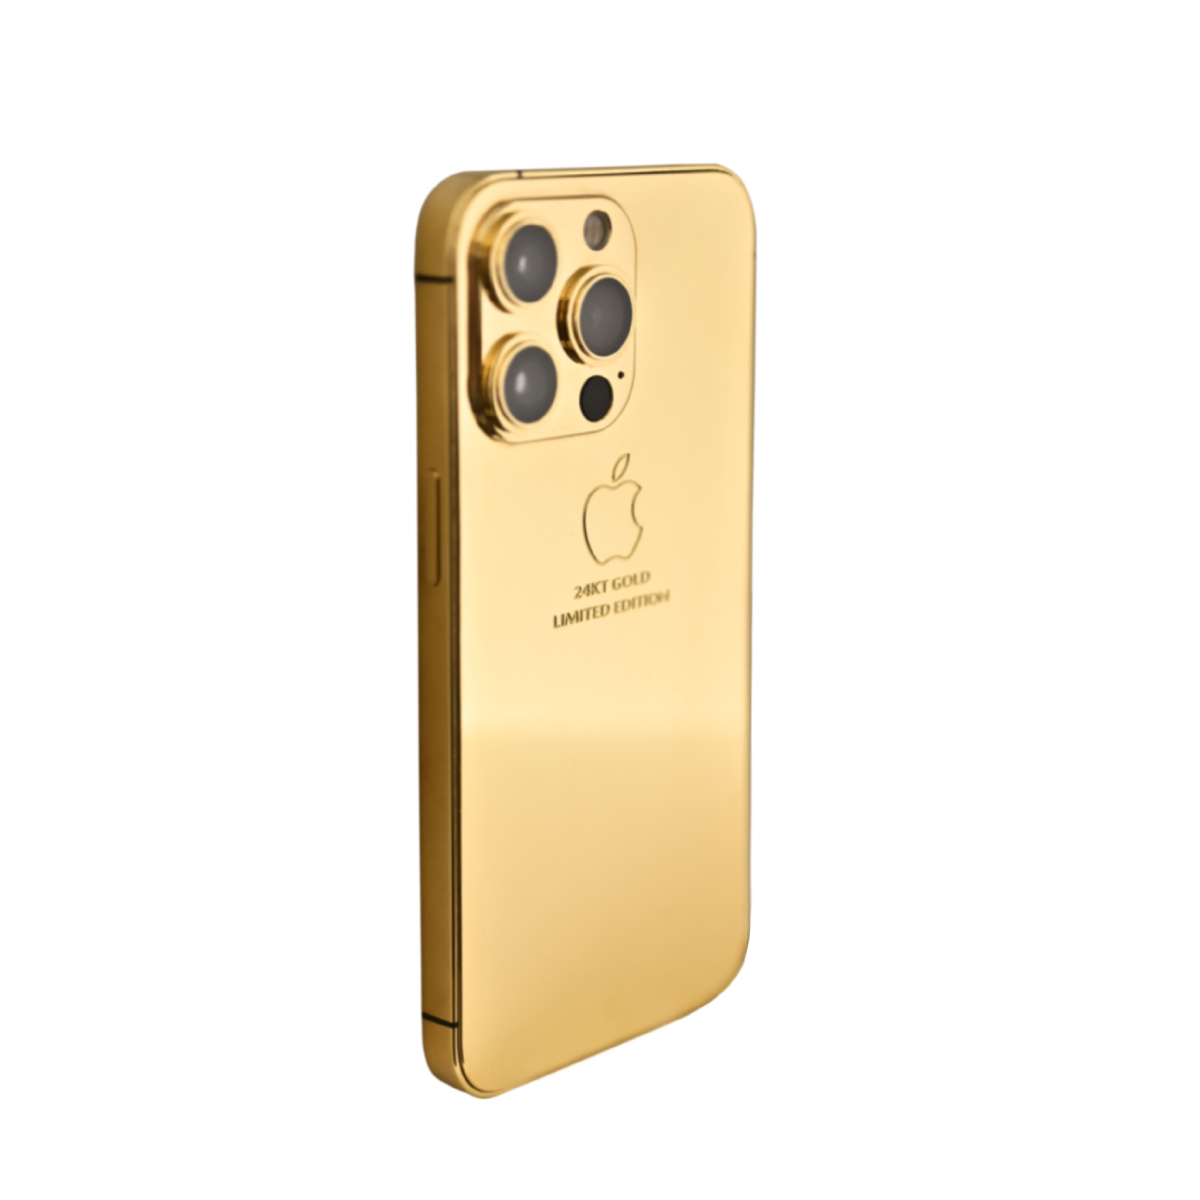 Caviar Luxury 24k Full Gold Customized iPhone 13 Pro Max 128 GB Limited Edition